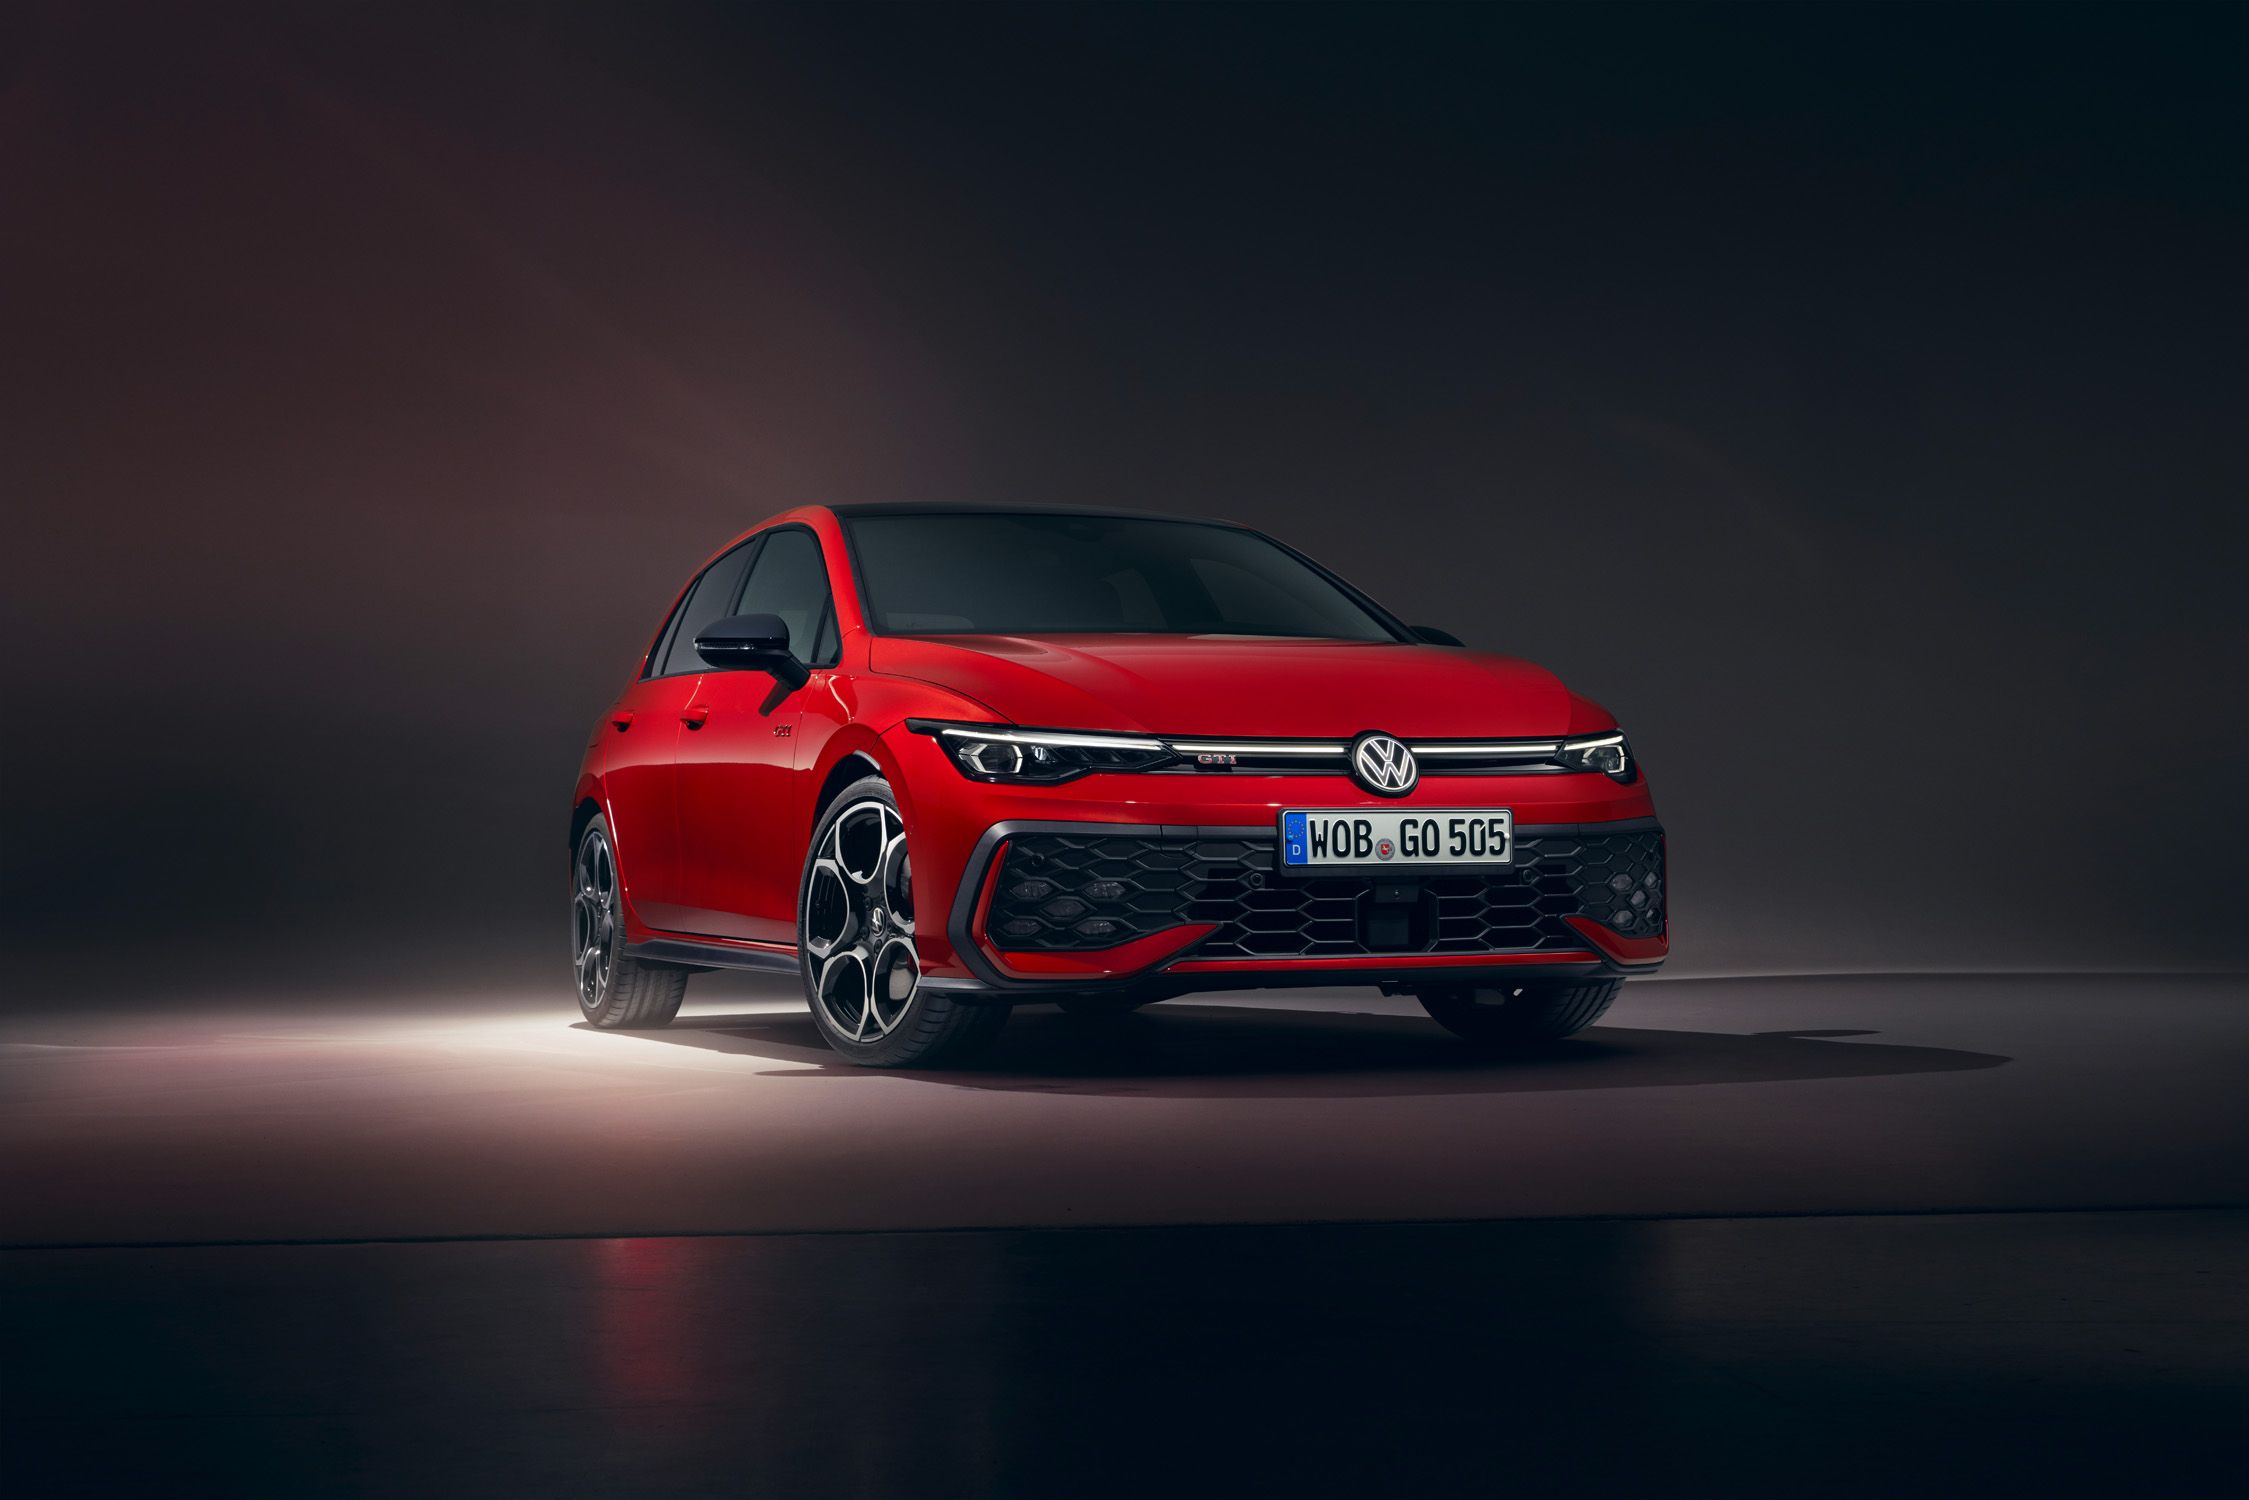 2019 Volkswagen Golf review: Fun on the cheap - CNET